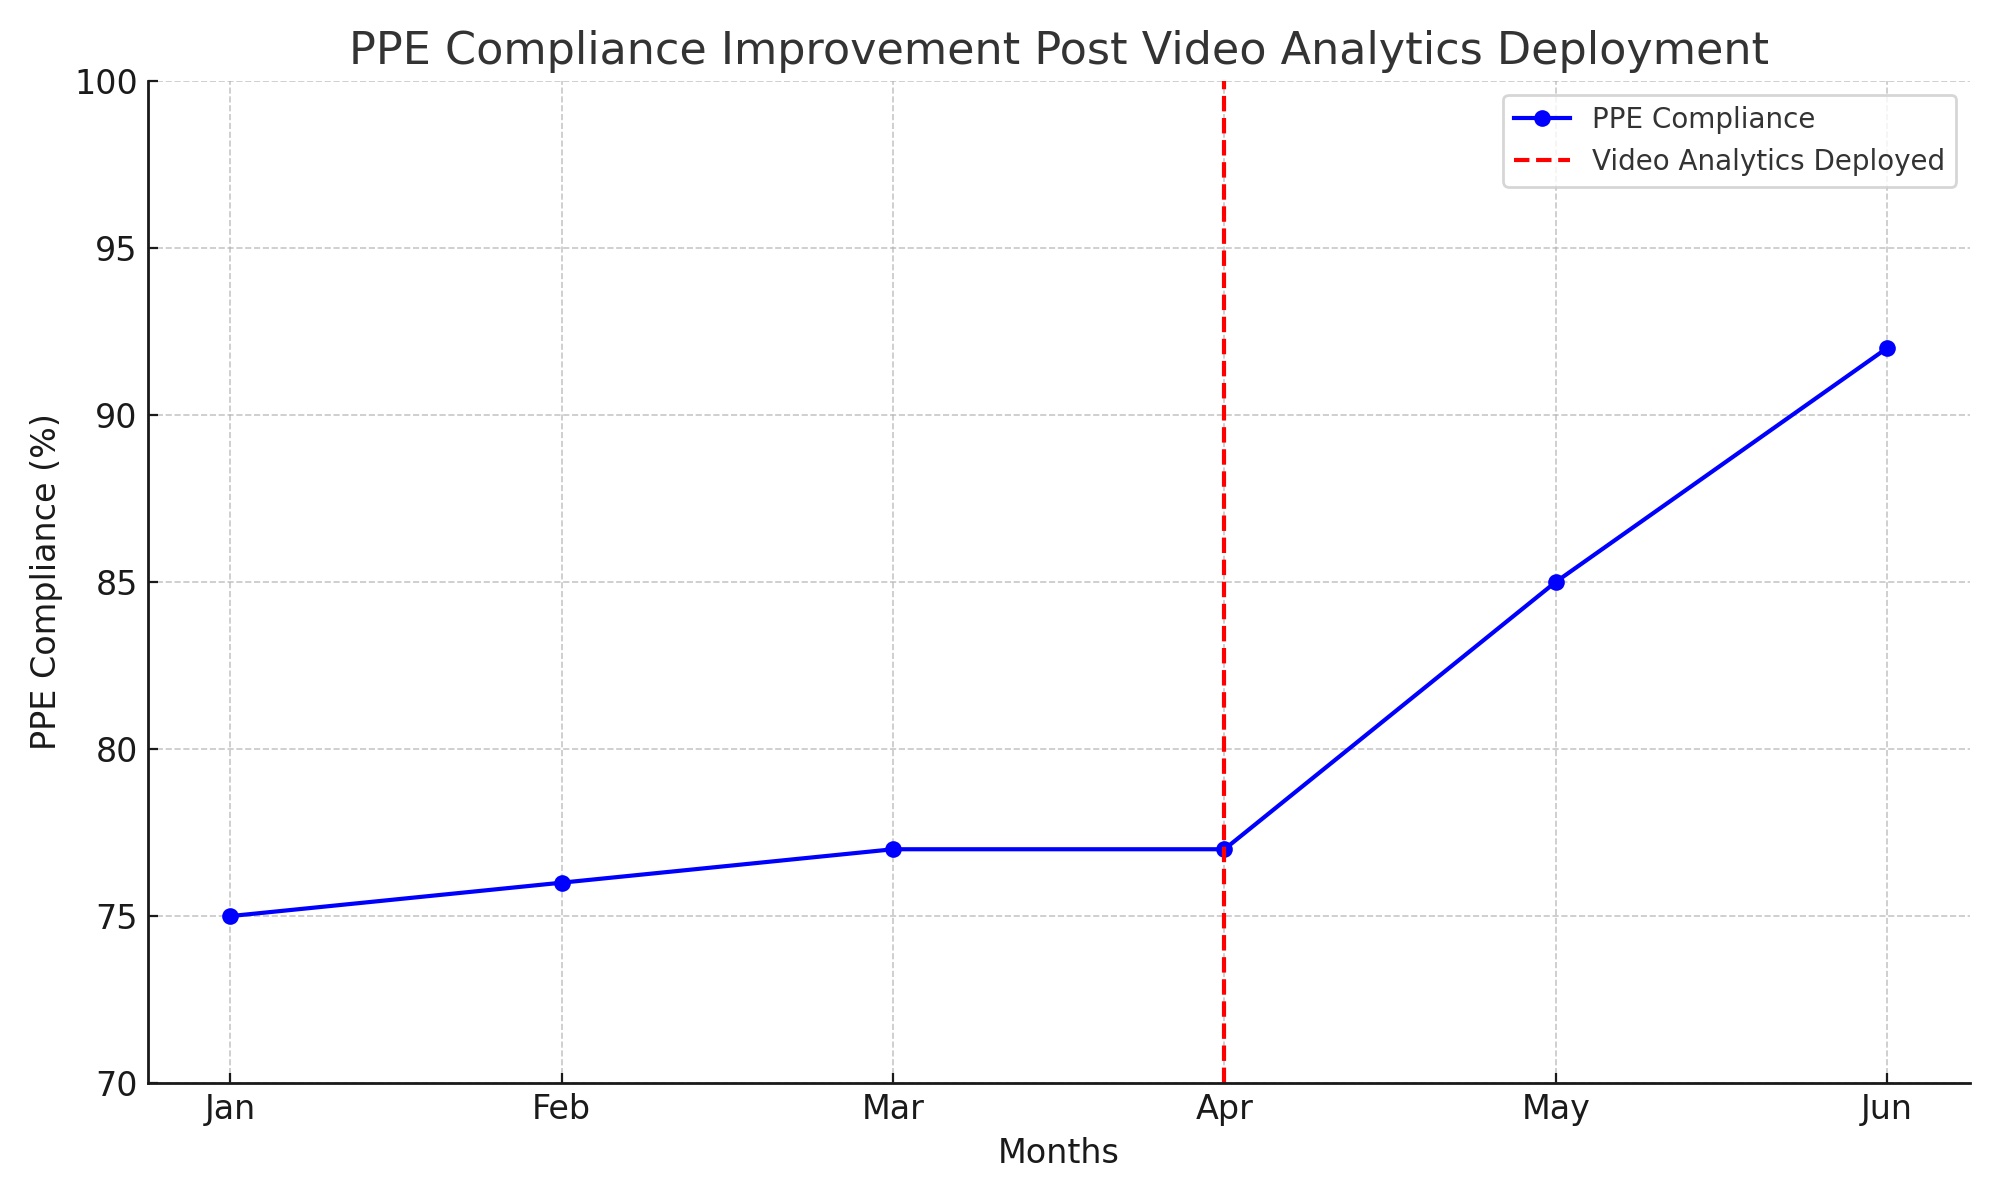 A chart showing improvement in ppe compliance after deployment of video analytics.